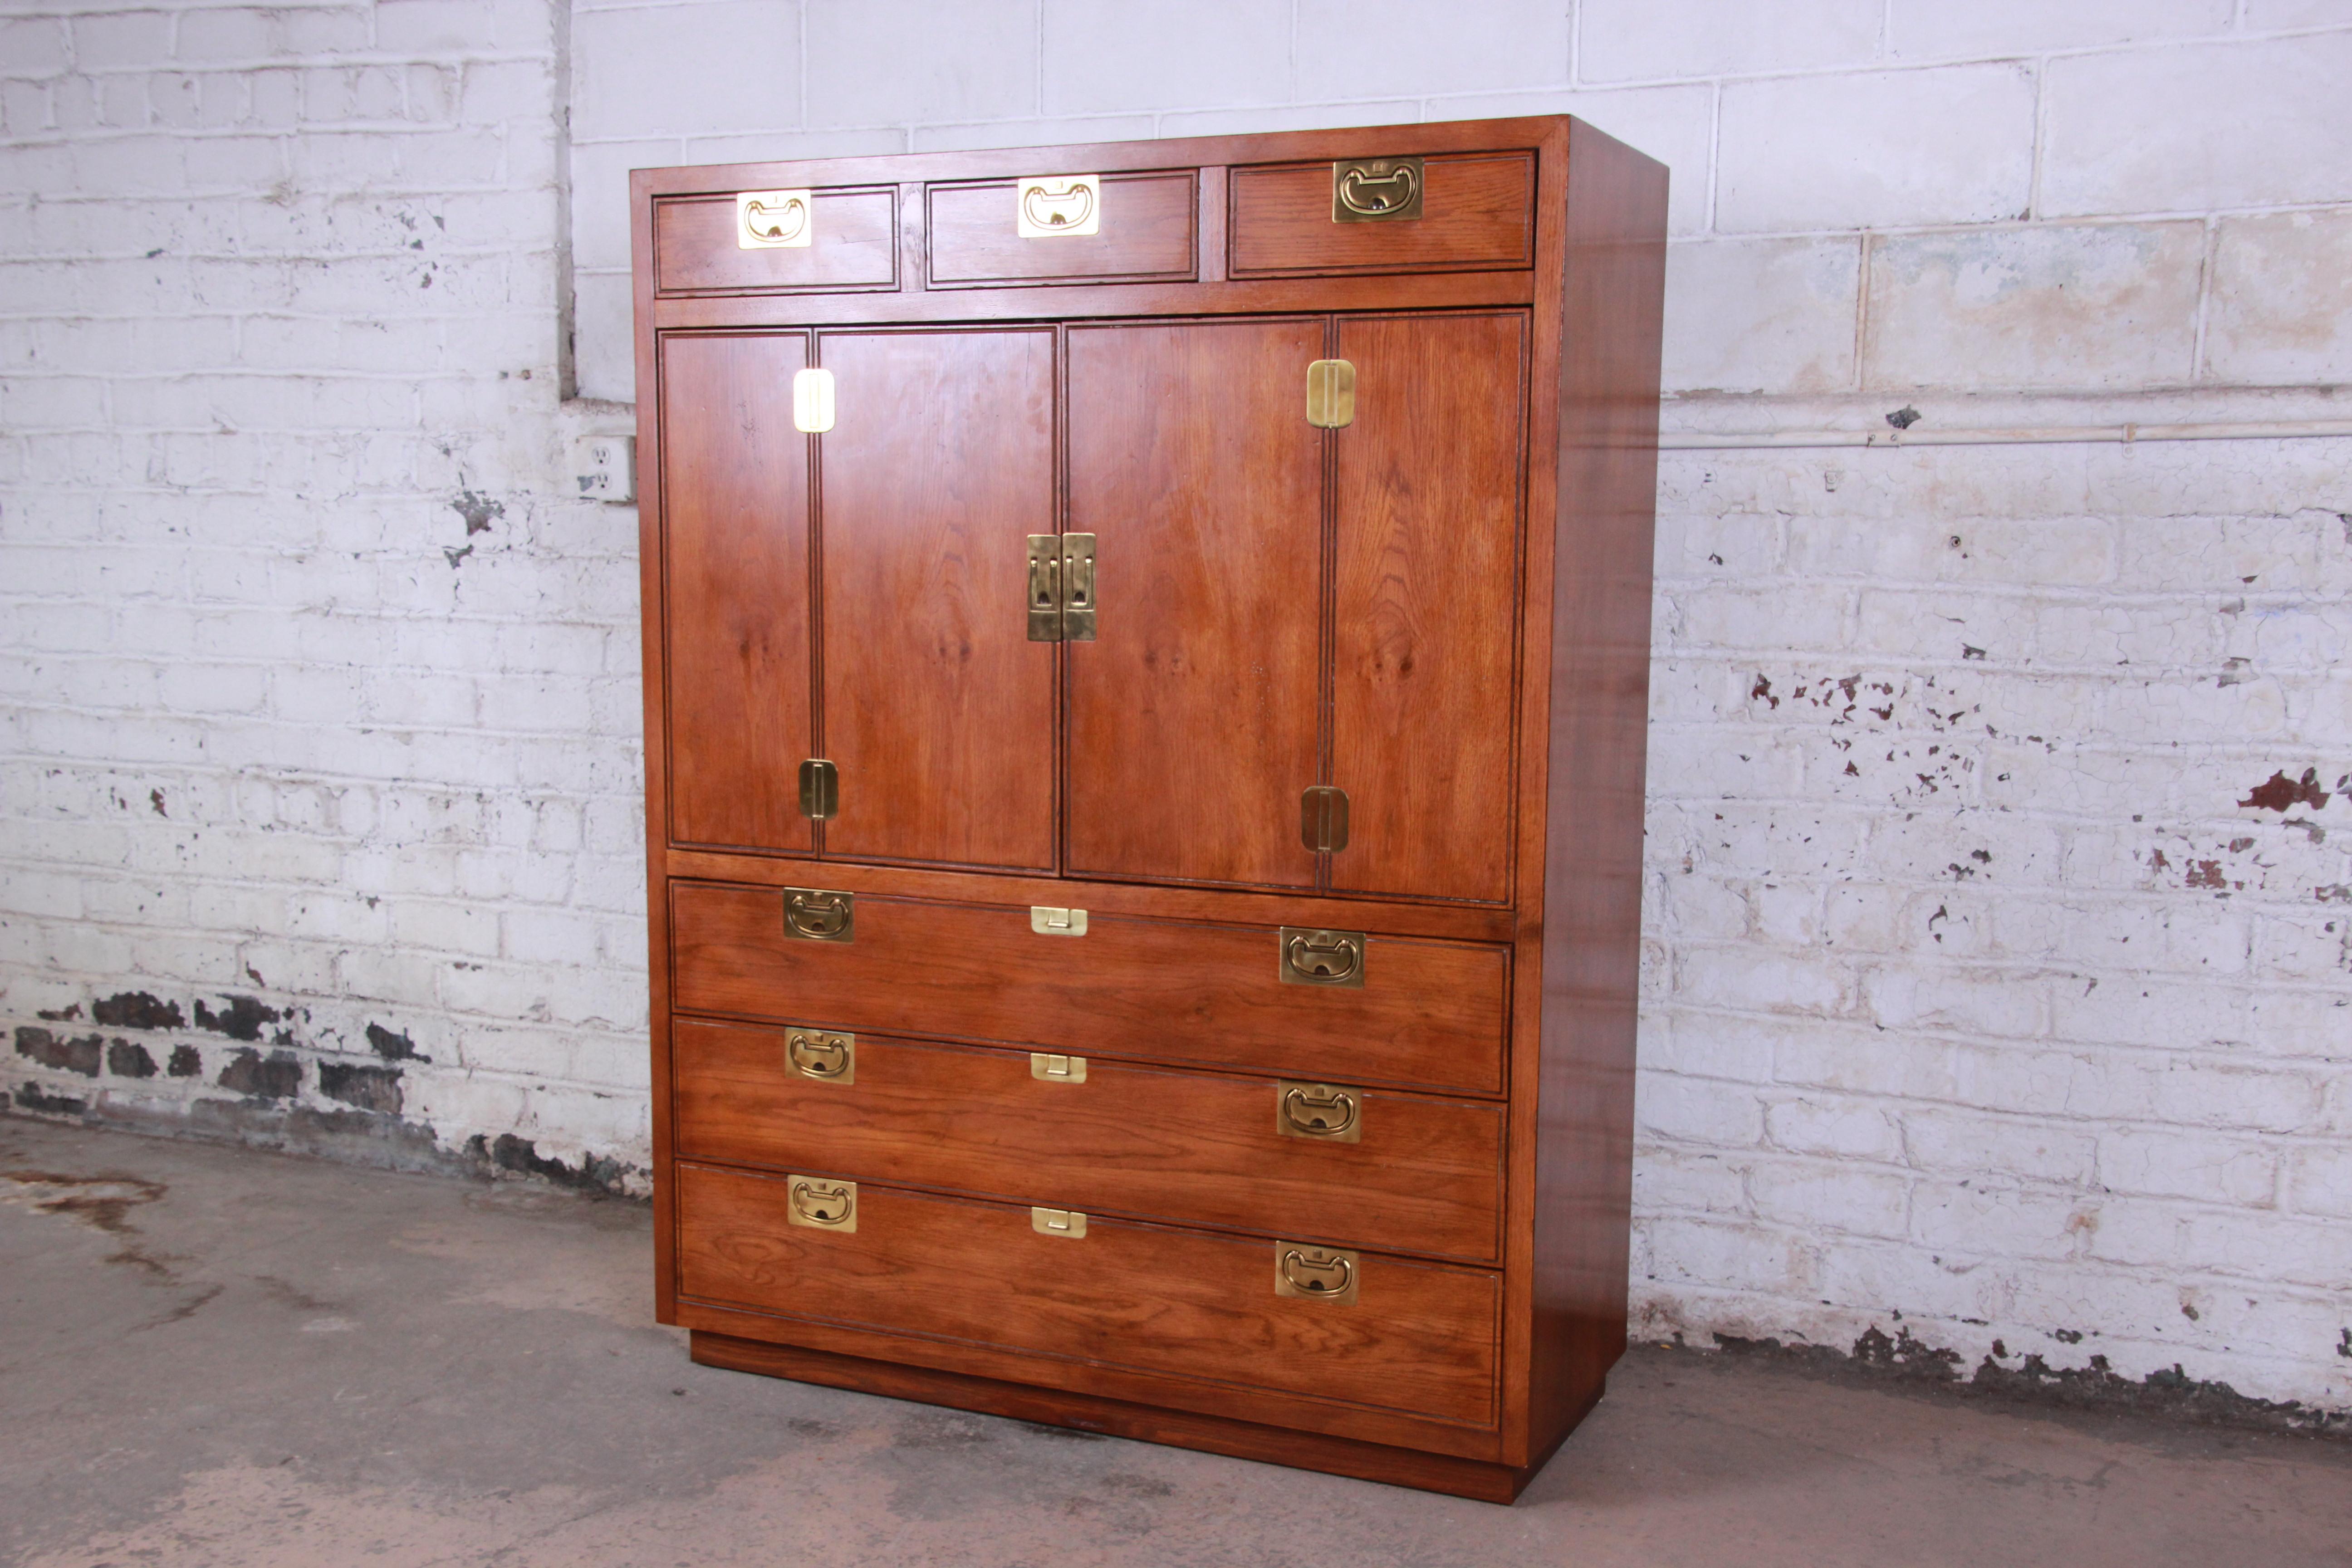 Offering a very nice and spacious Henredon Campaign style oak gentlemen's chest or armoire from the Bel Air line. The top of the chest offers three drawers for storage and just below are two large cabinet doors that open to a large storage and